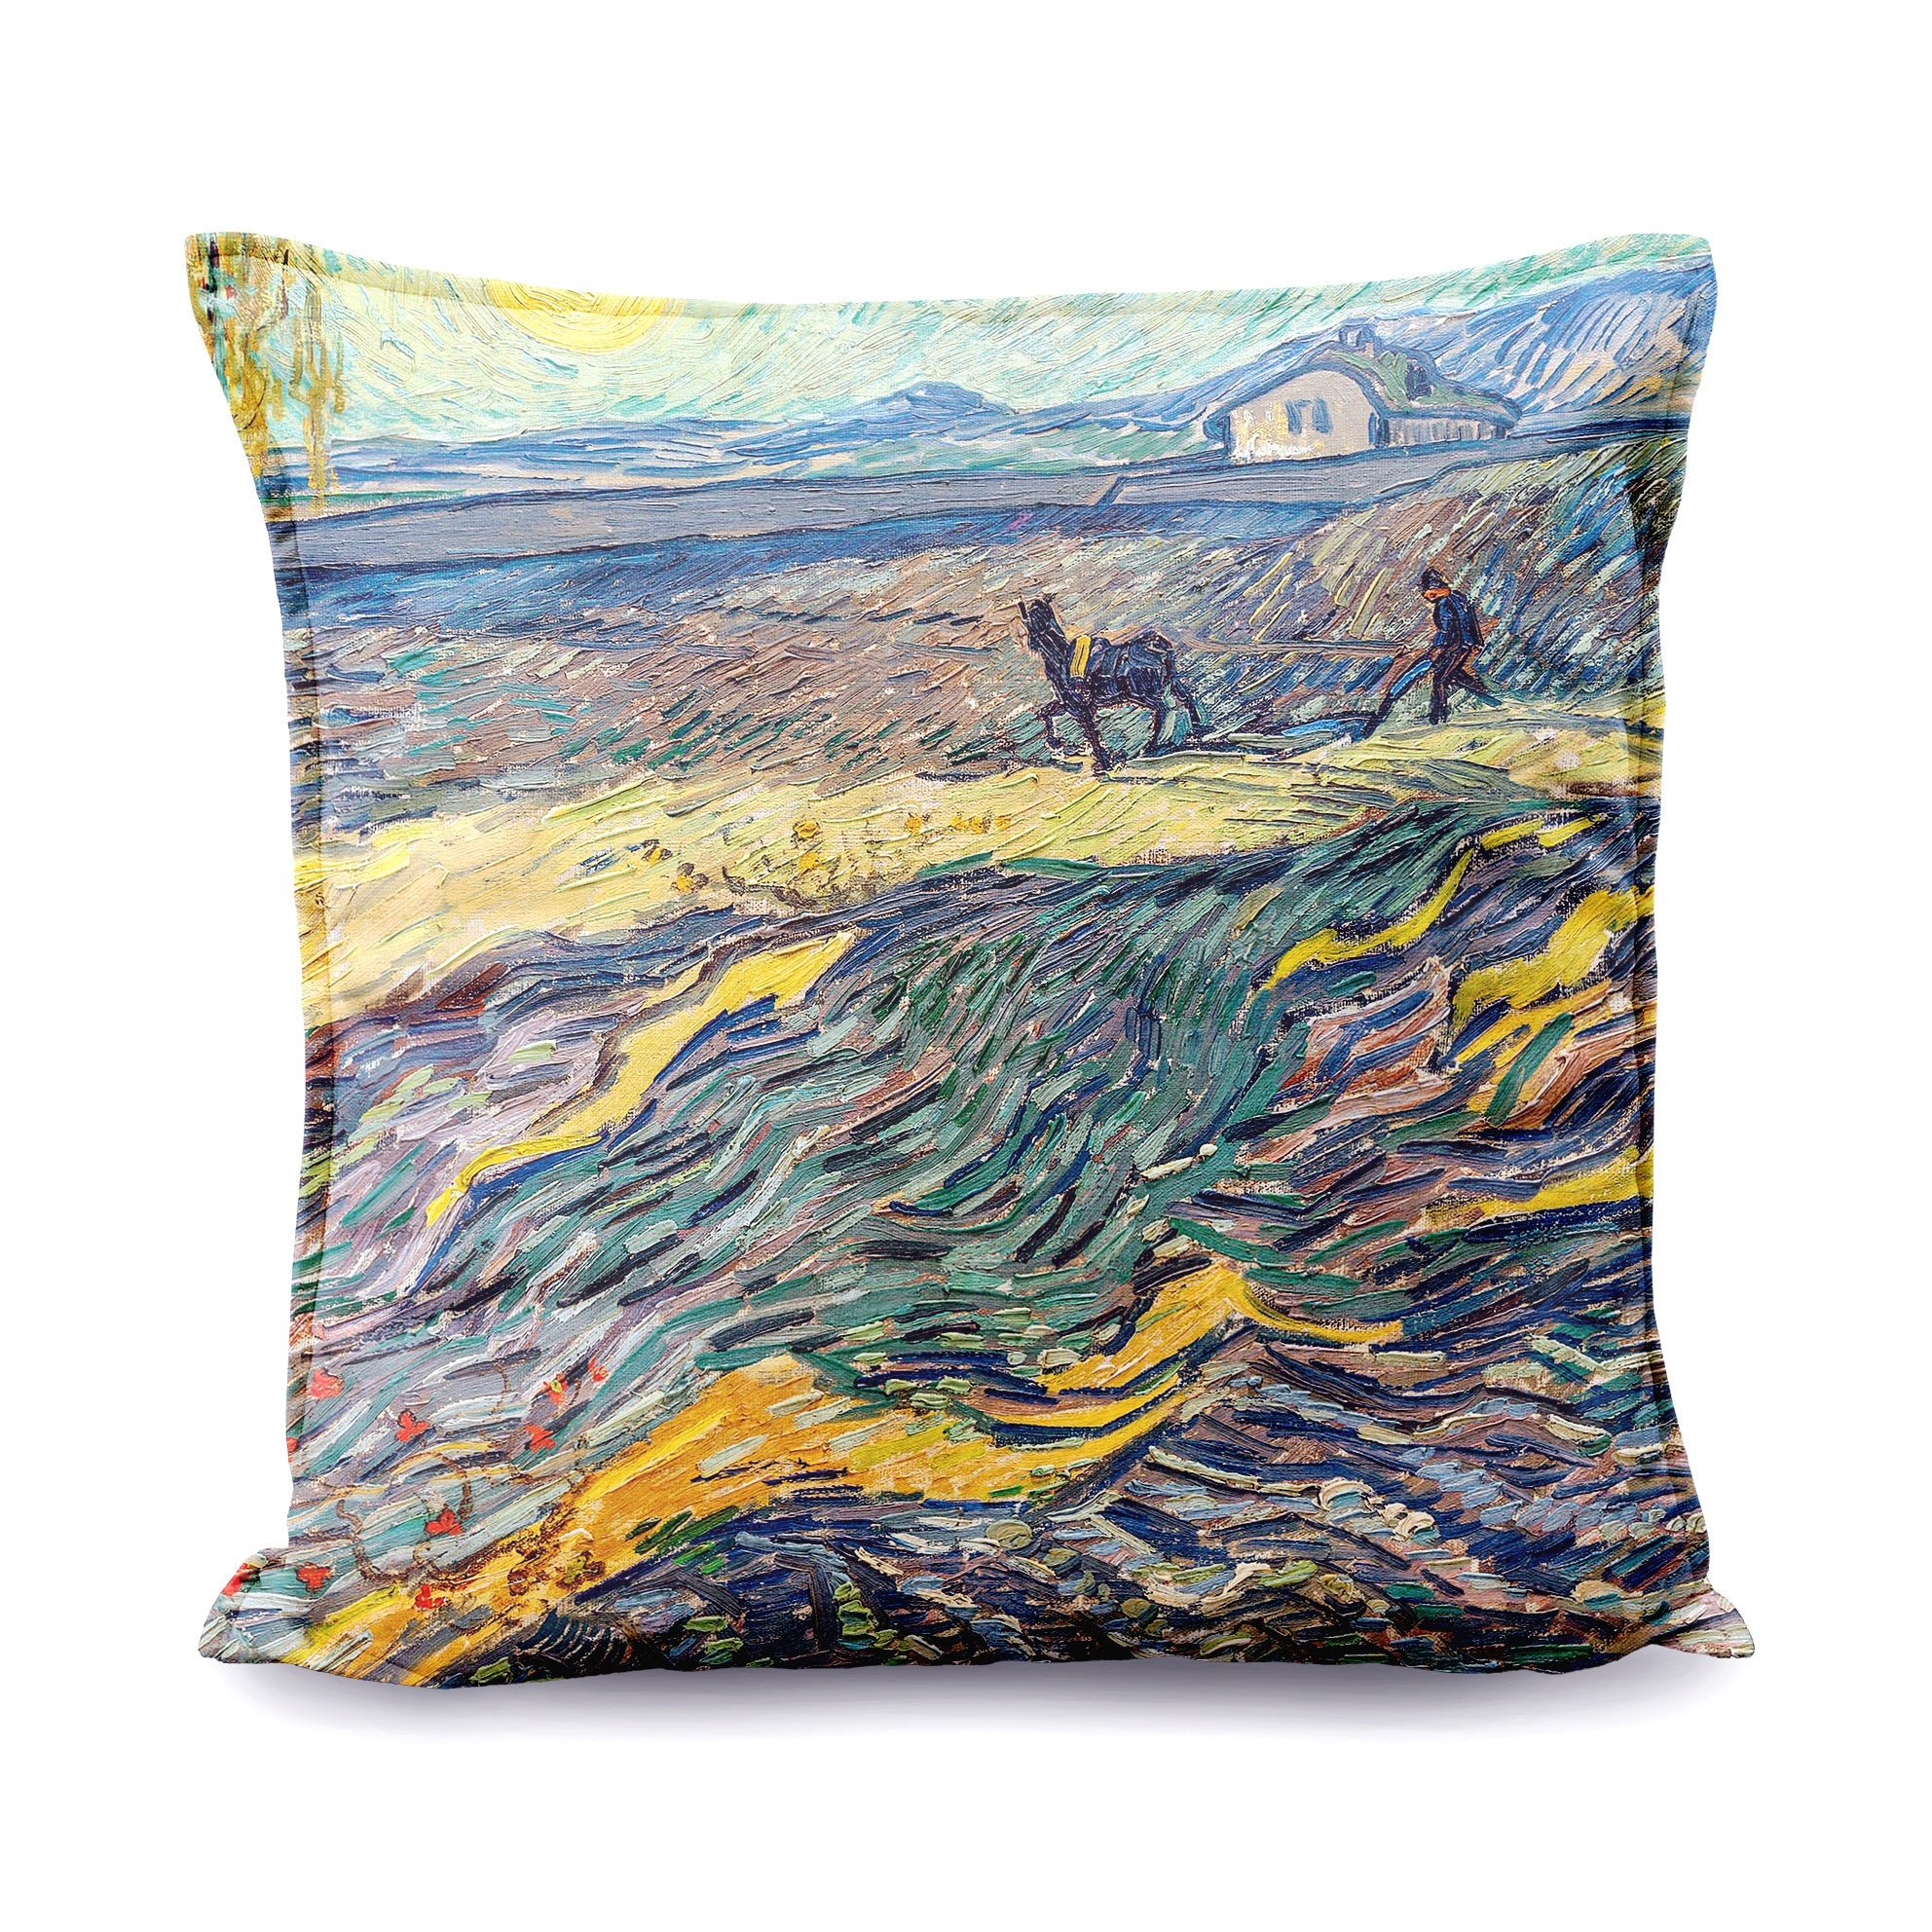 Decorative cushion Vincent van Gogh "Field with Plowing Farmers"